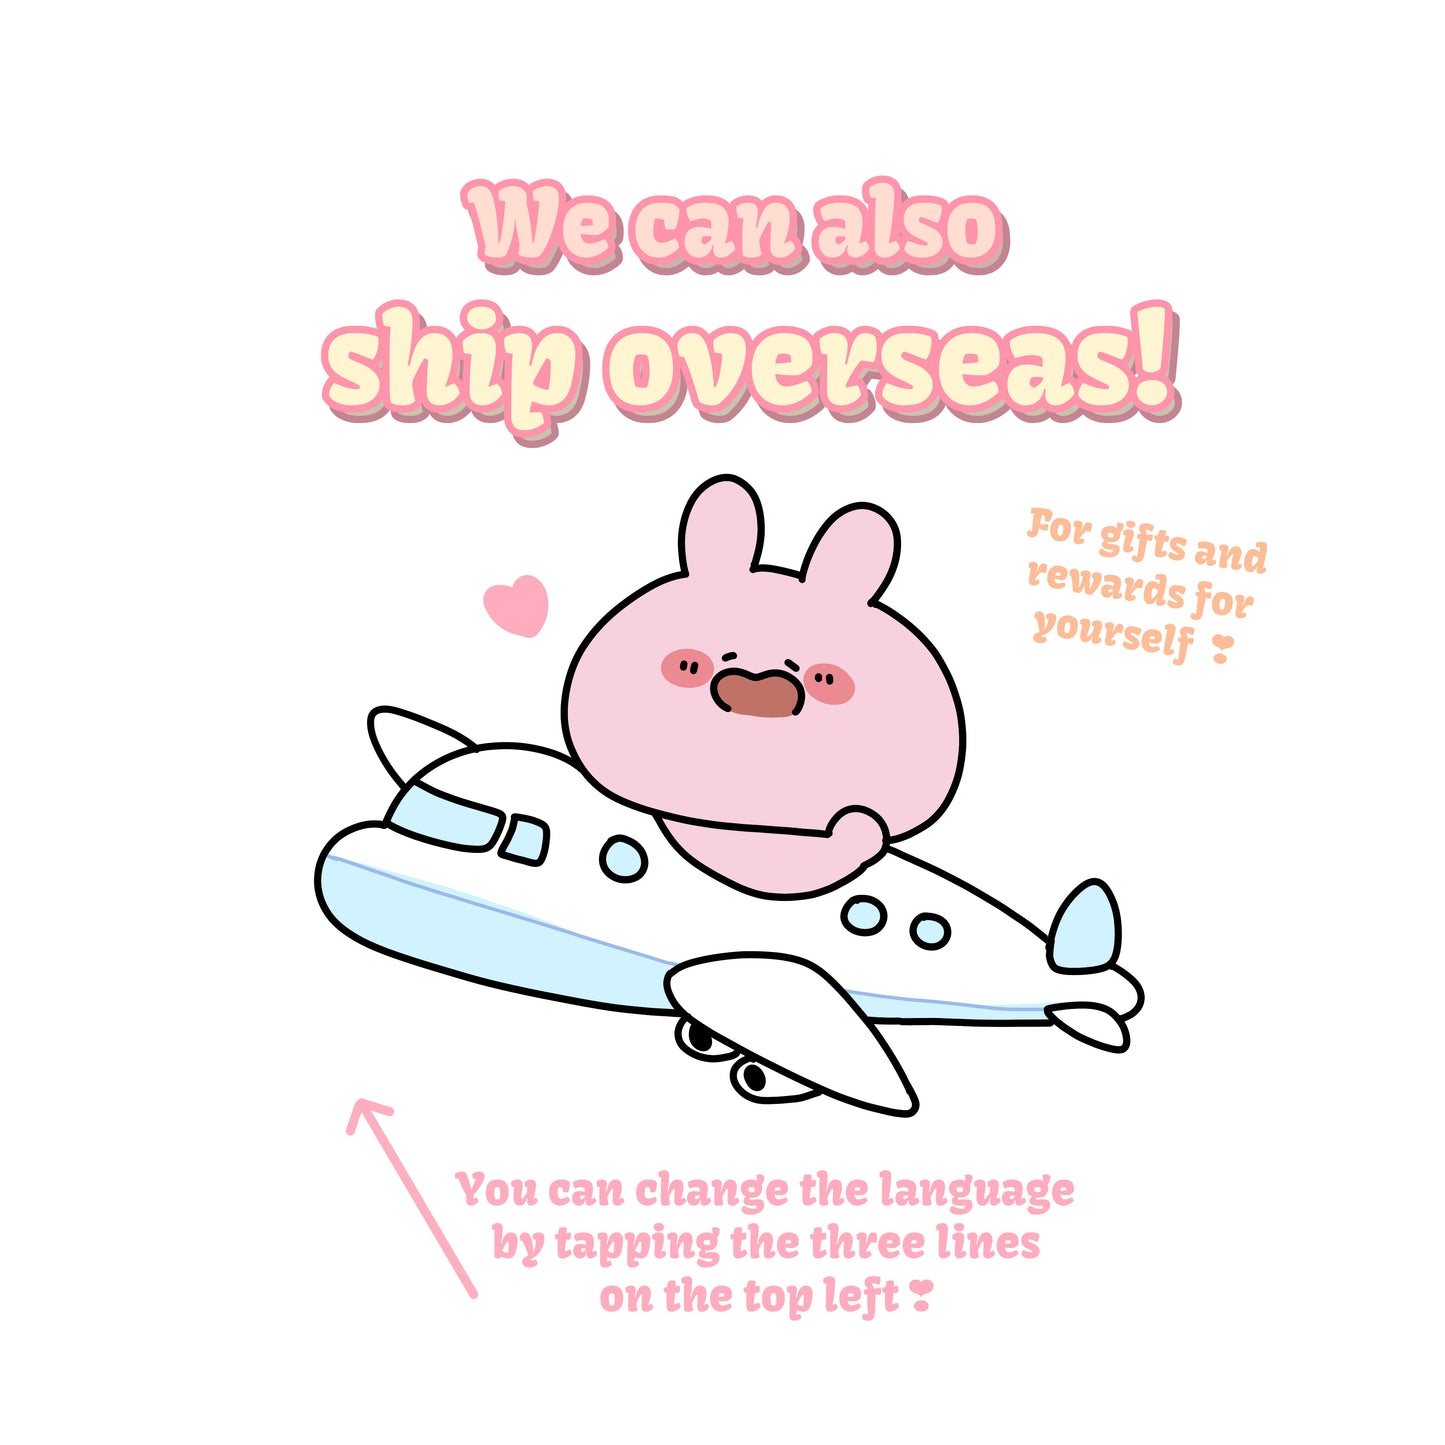 [Asamimi-chan] SAFE DRIVE sticker (protect you! series) [shipped in mid-March]